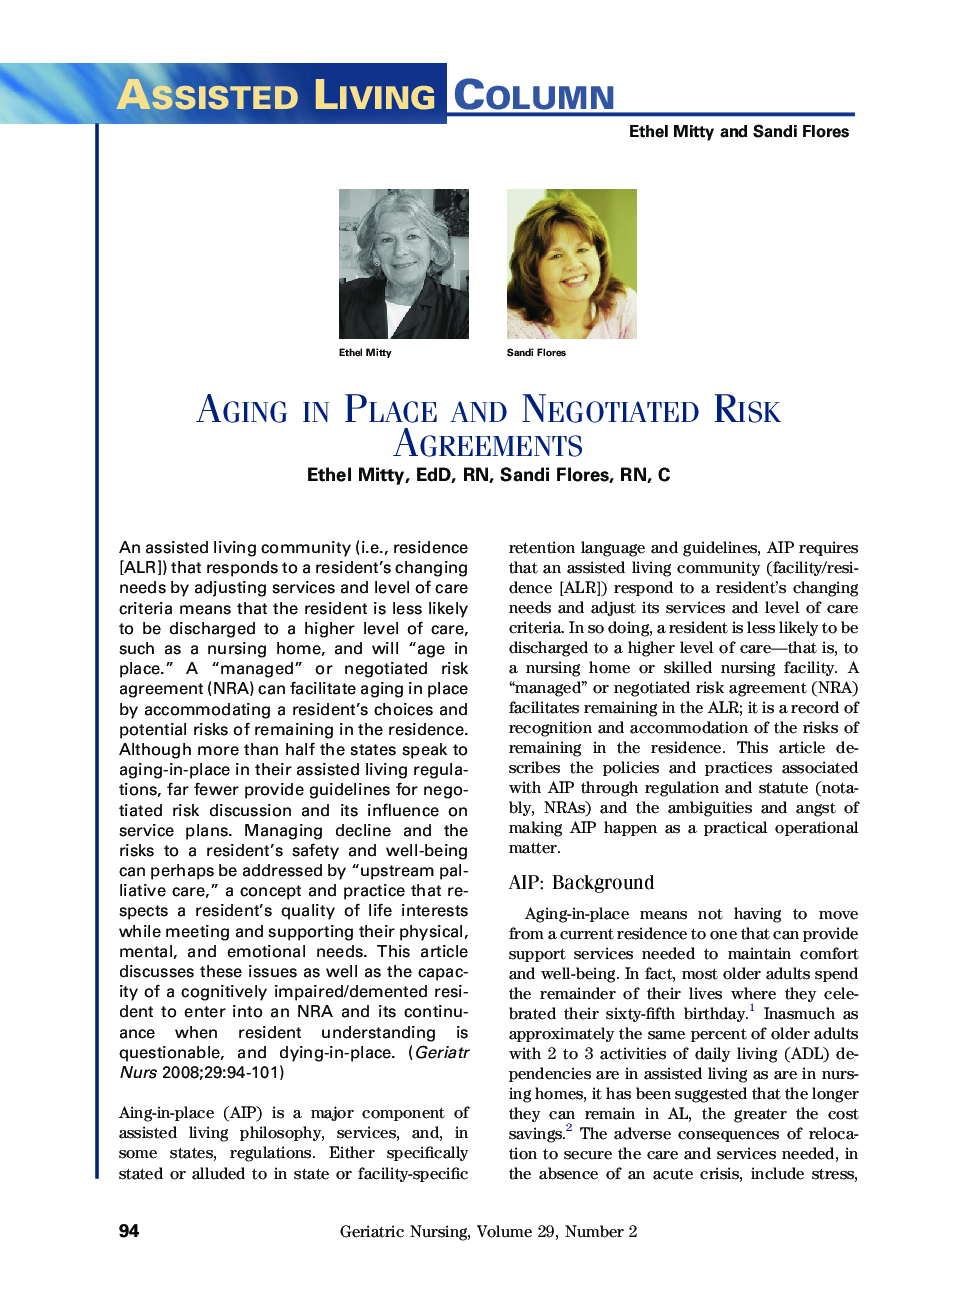 Aging in Place and Negotiated Risk Agreements